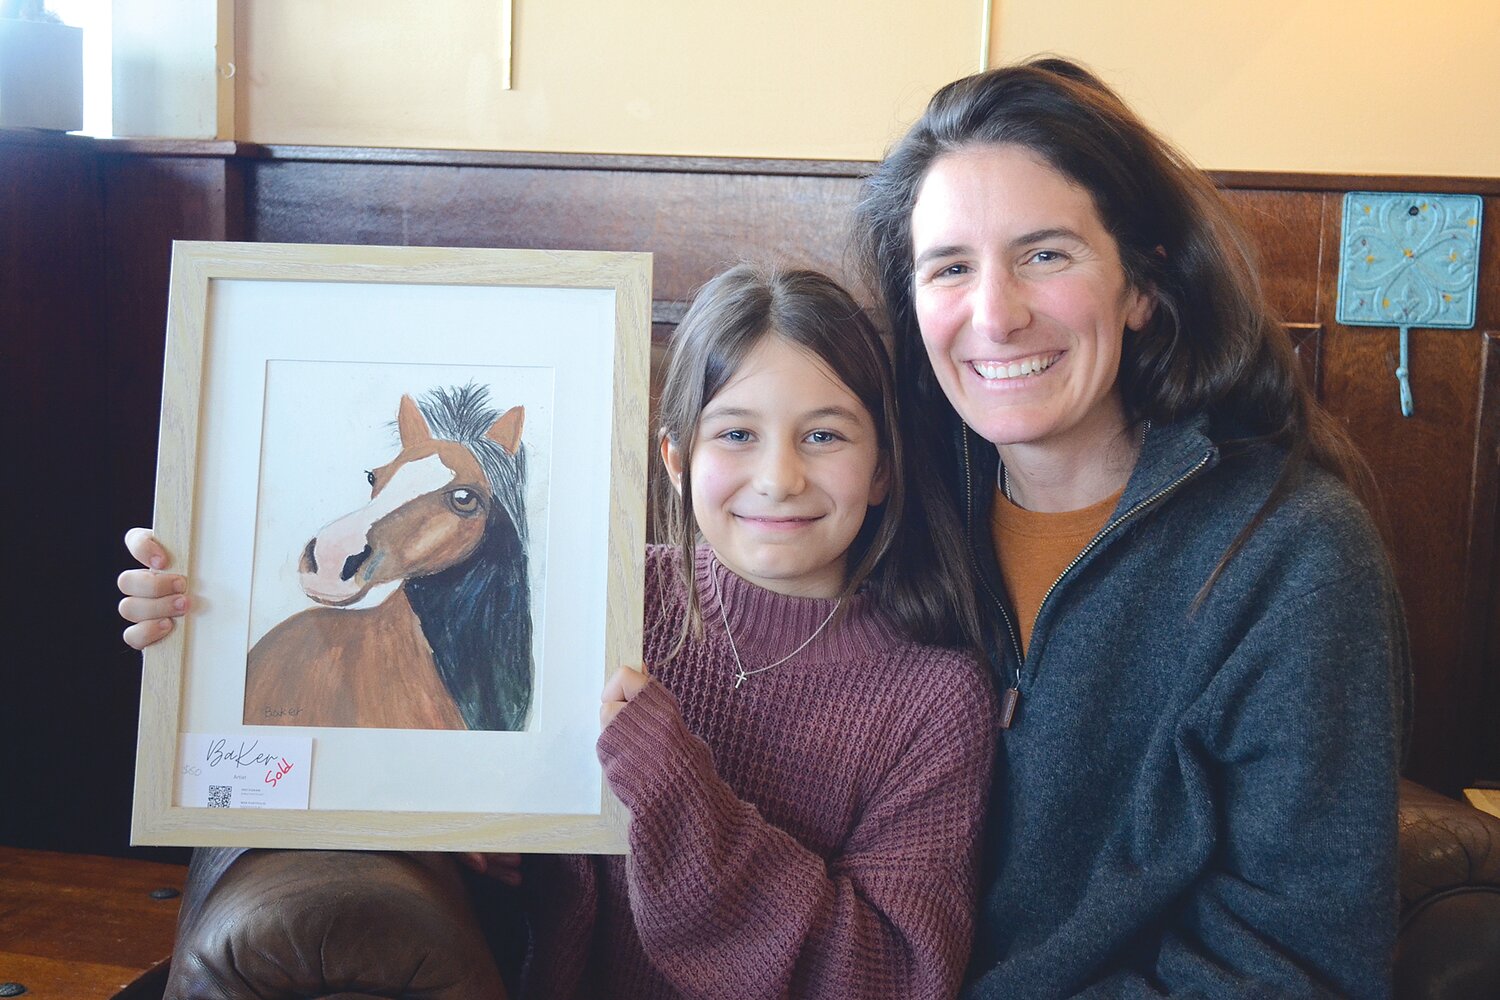 Baker Smith, 9, and her mom, Jen, pose with one of Baker’s favorite pieces of artwork at the Coffee Depot on Monday afternoon.